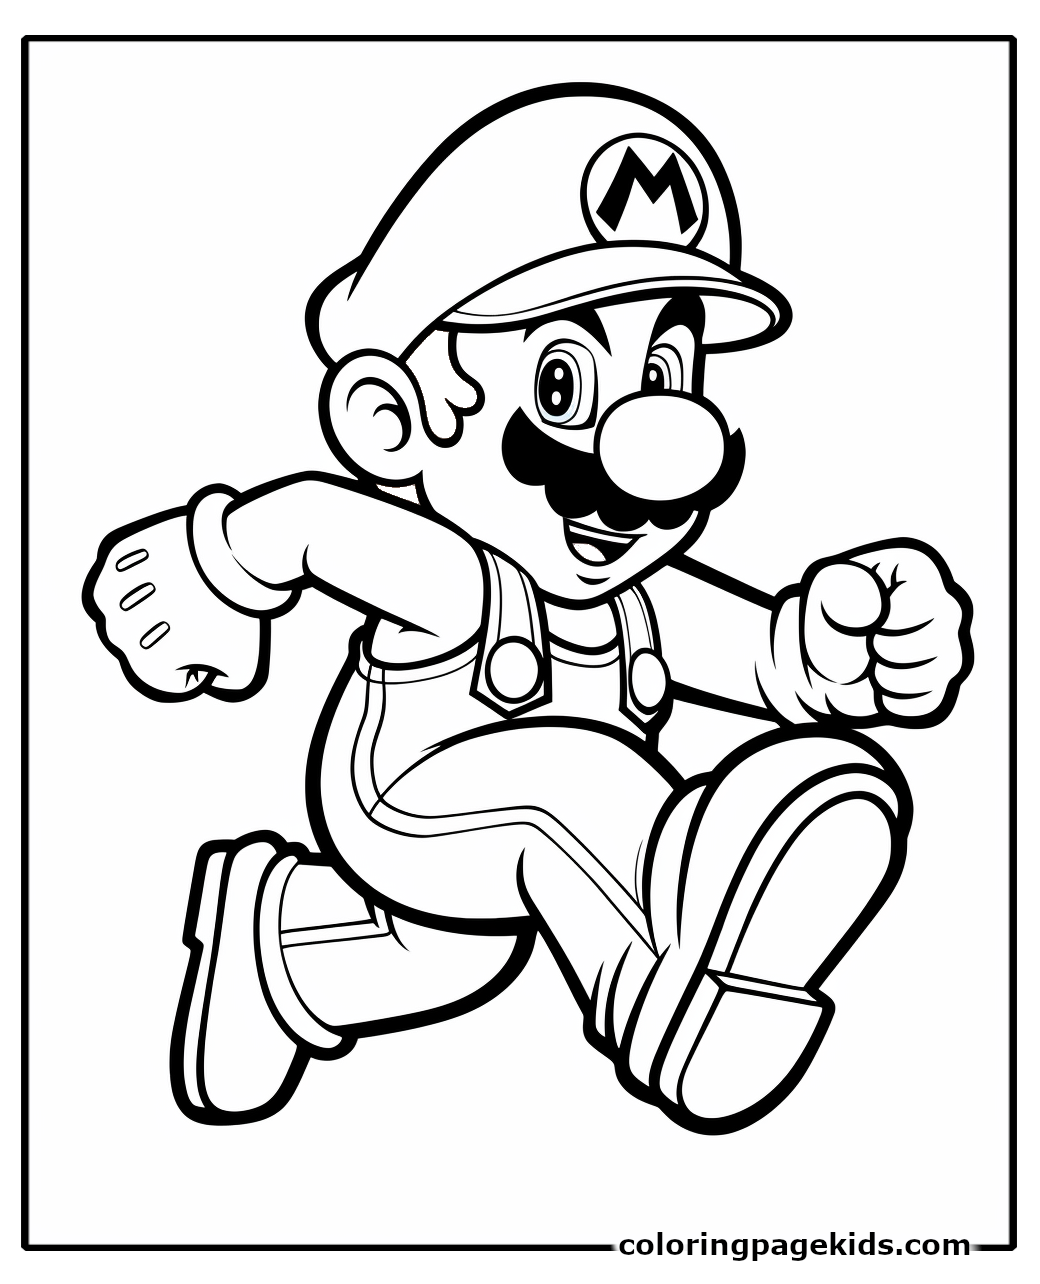 Free Printable Super Mario Odyssey Coloring Pages For Kids ...